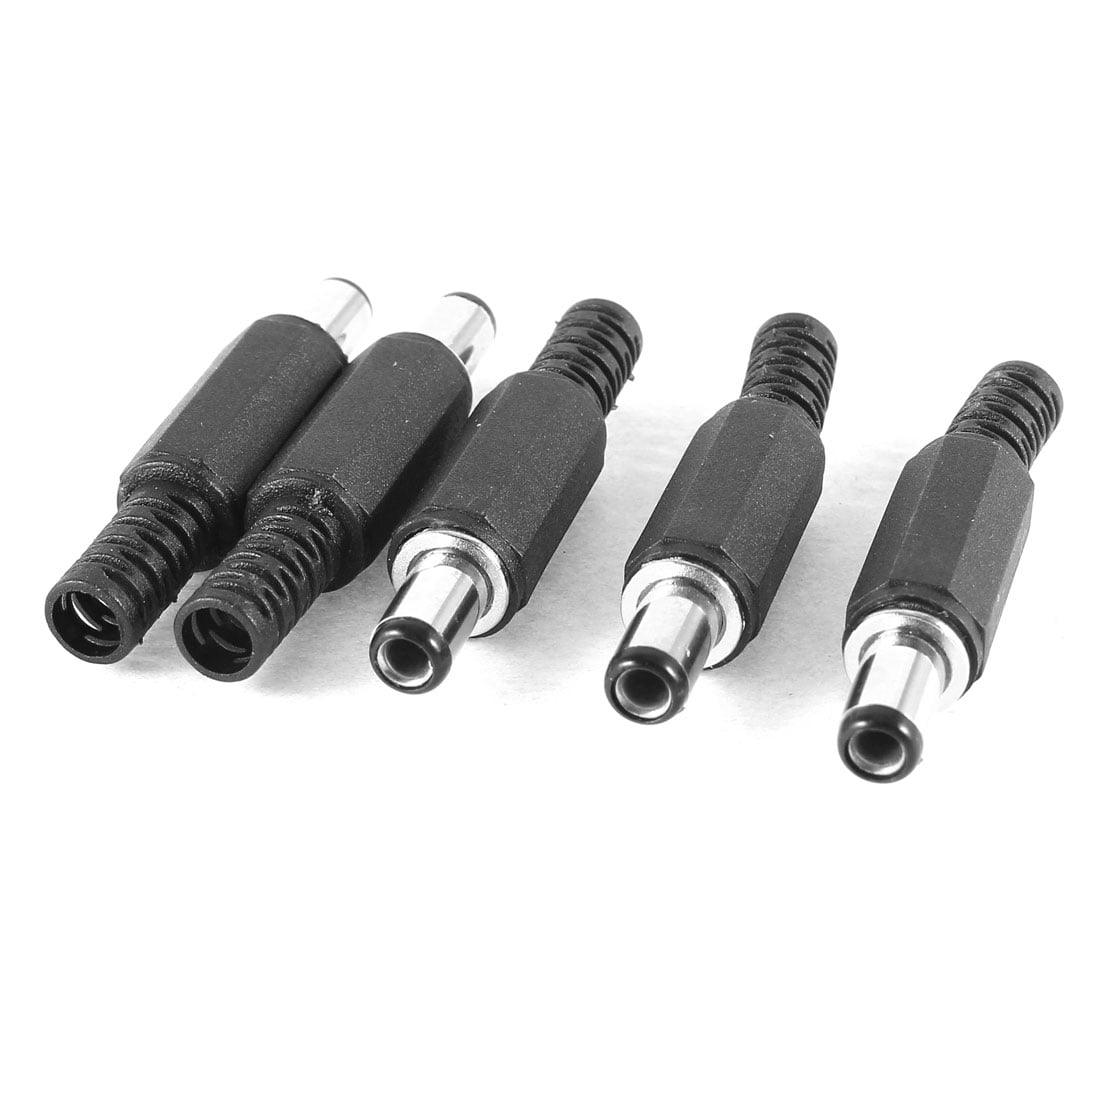 10 pcs DC Power 2.1mmx5.5mm Male Plug Jack Connector Socket Adapter for CCTV 